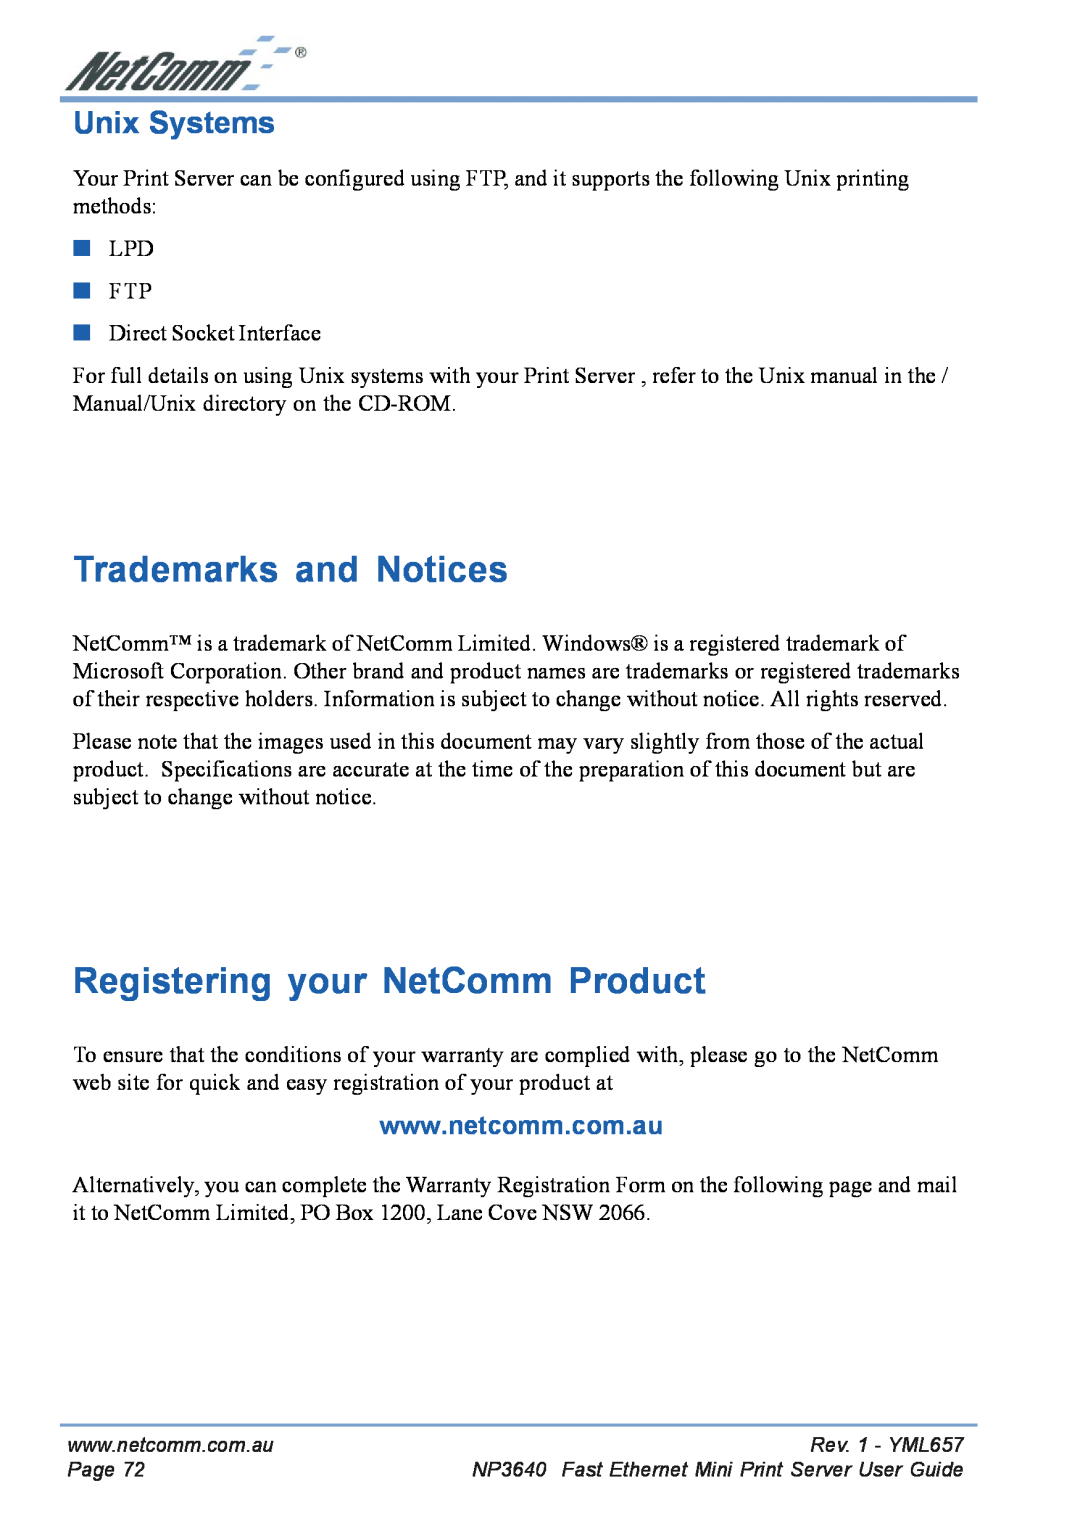 NetComm NP3640 manual Trademarks and Notices, Registering your NetComm Product, Unix Systems 